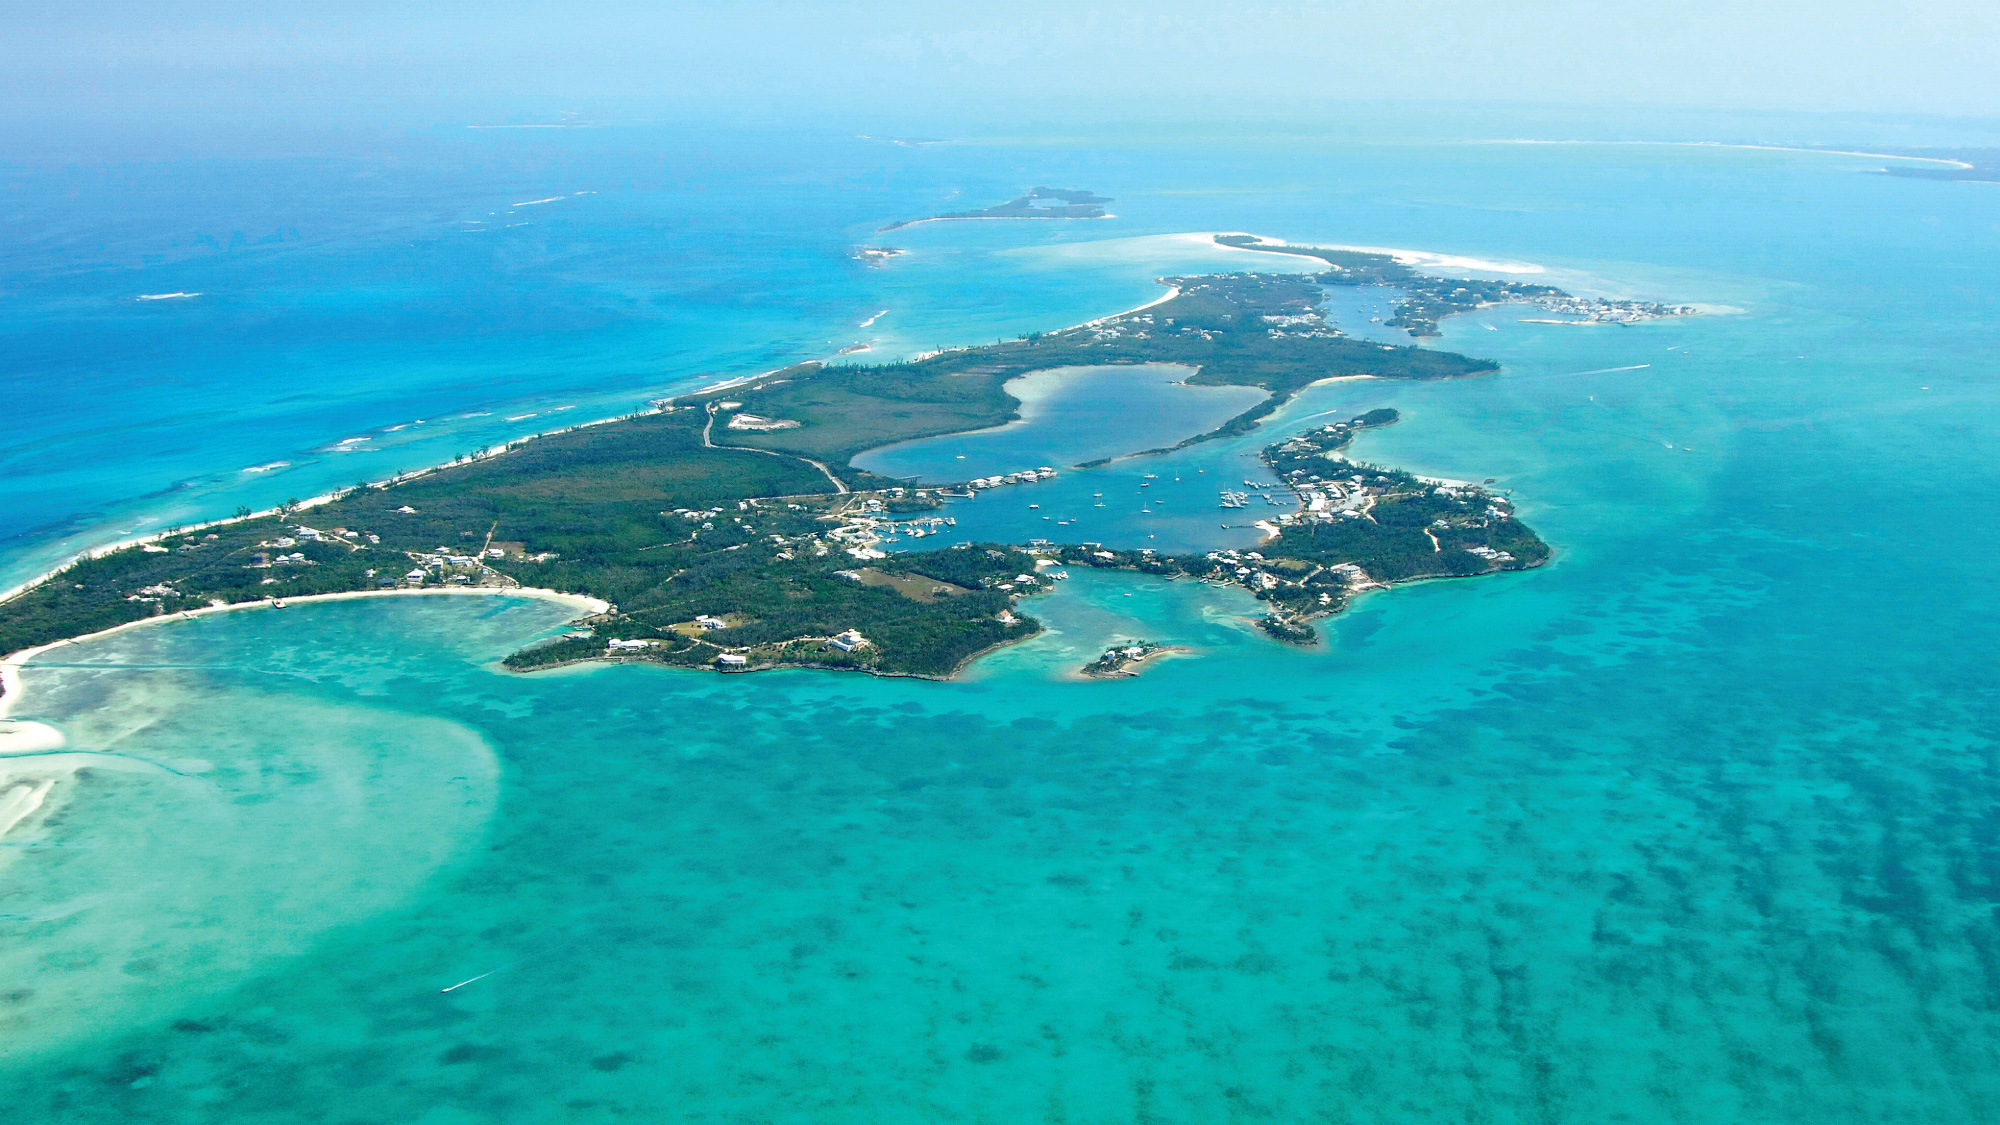 A breathtaking aerial view of Treasure Cay, Bahamas, showcasing turquoise waters and sandy beaches, ideal for self-flying pilots exploring the beautiful Bahamas by air